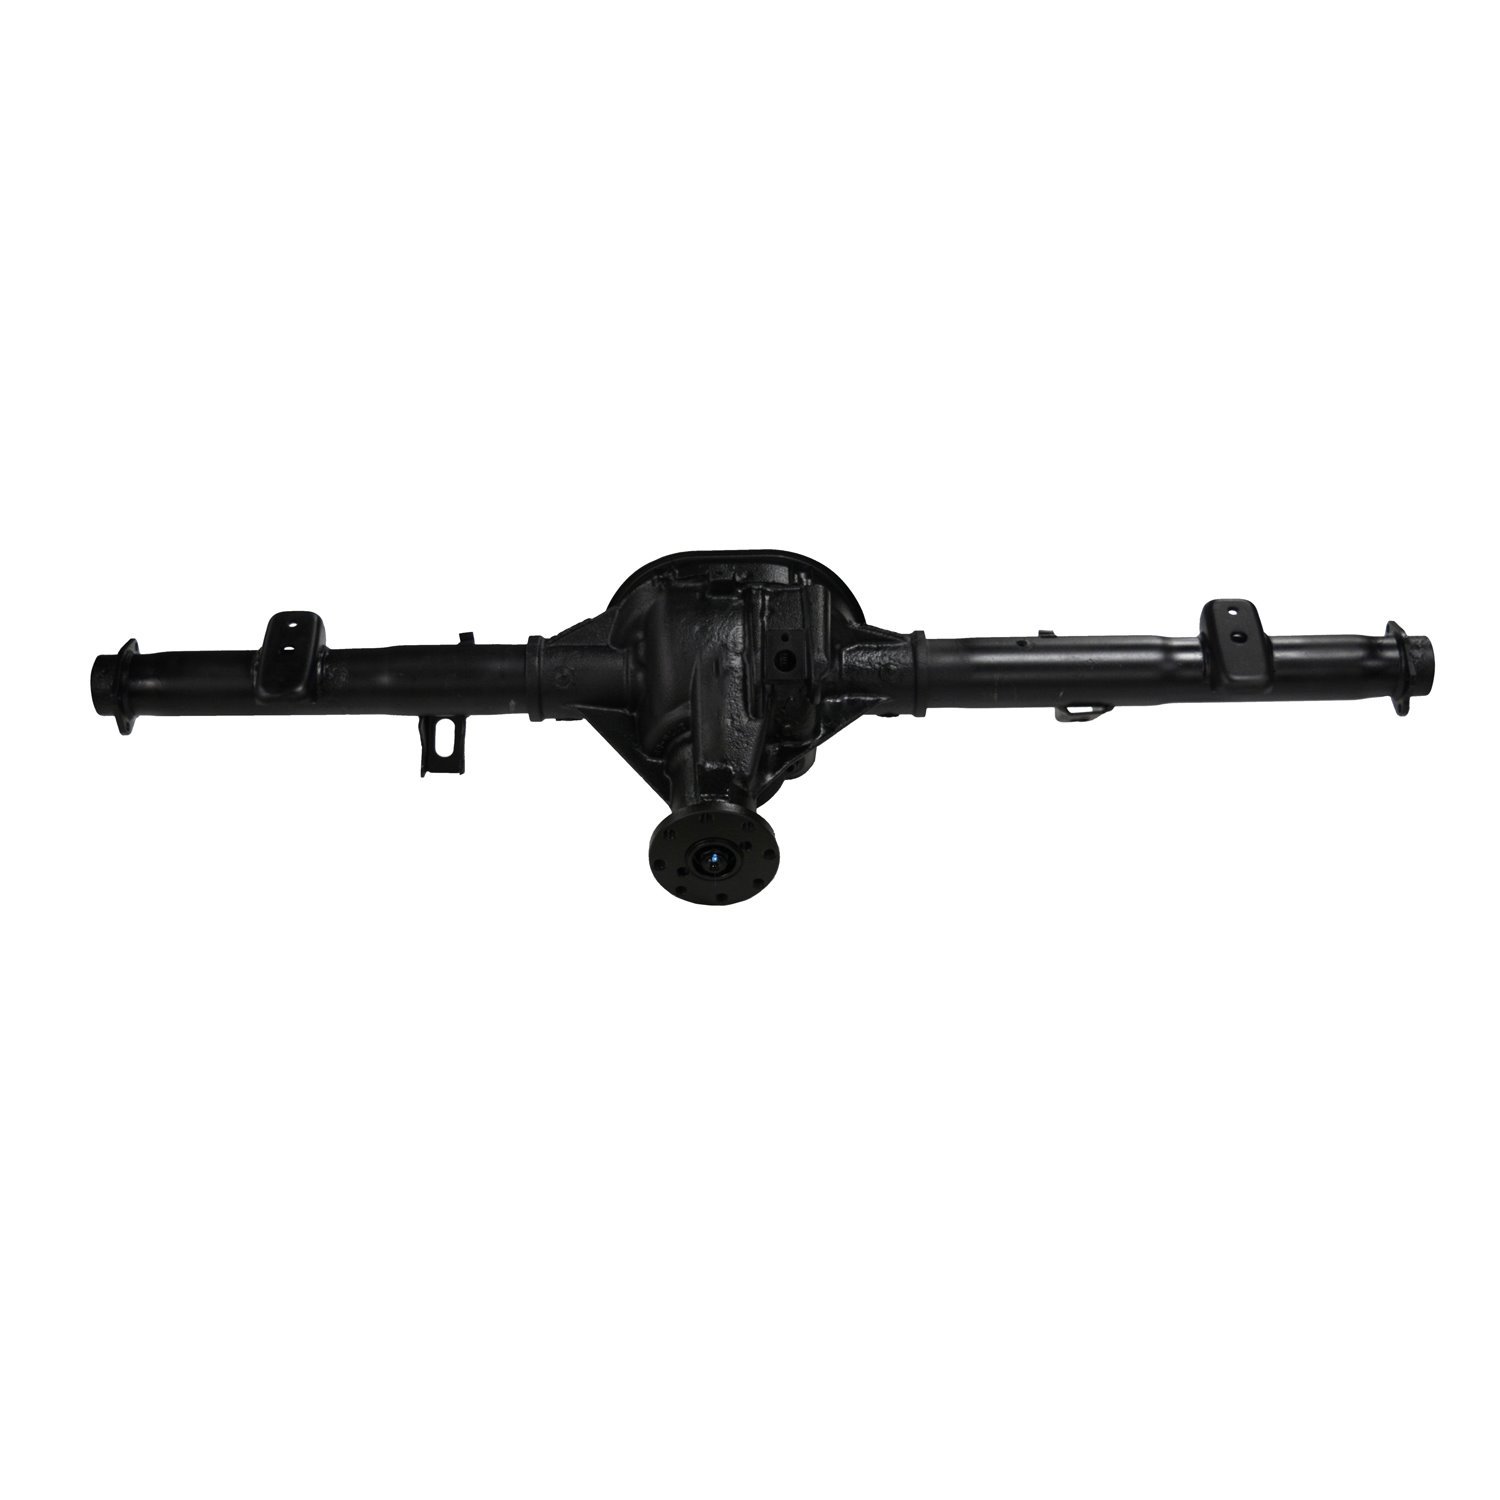 Remanufactured Complete Axle Assembly for Ford 7.5" 94-97 Ford Ranger 3.27, 10" Brakes